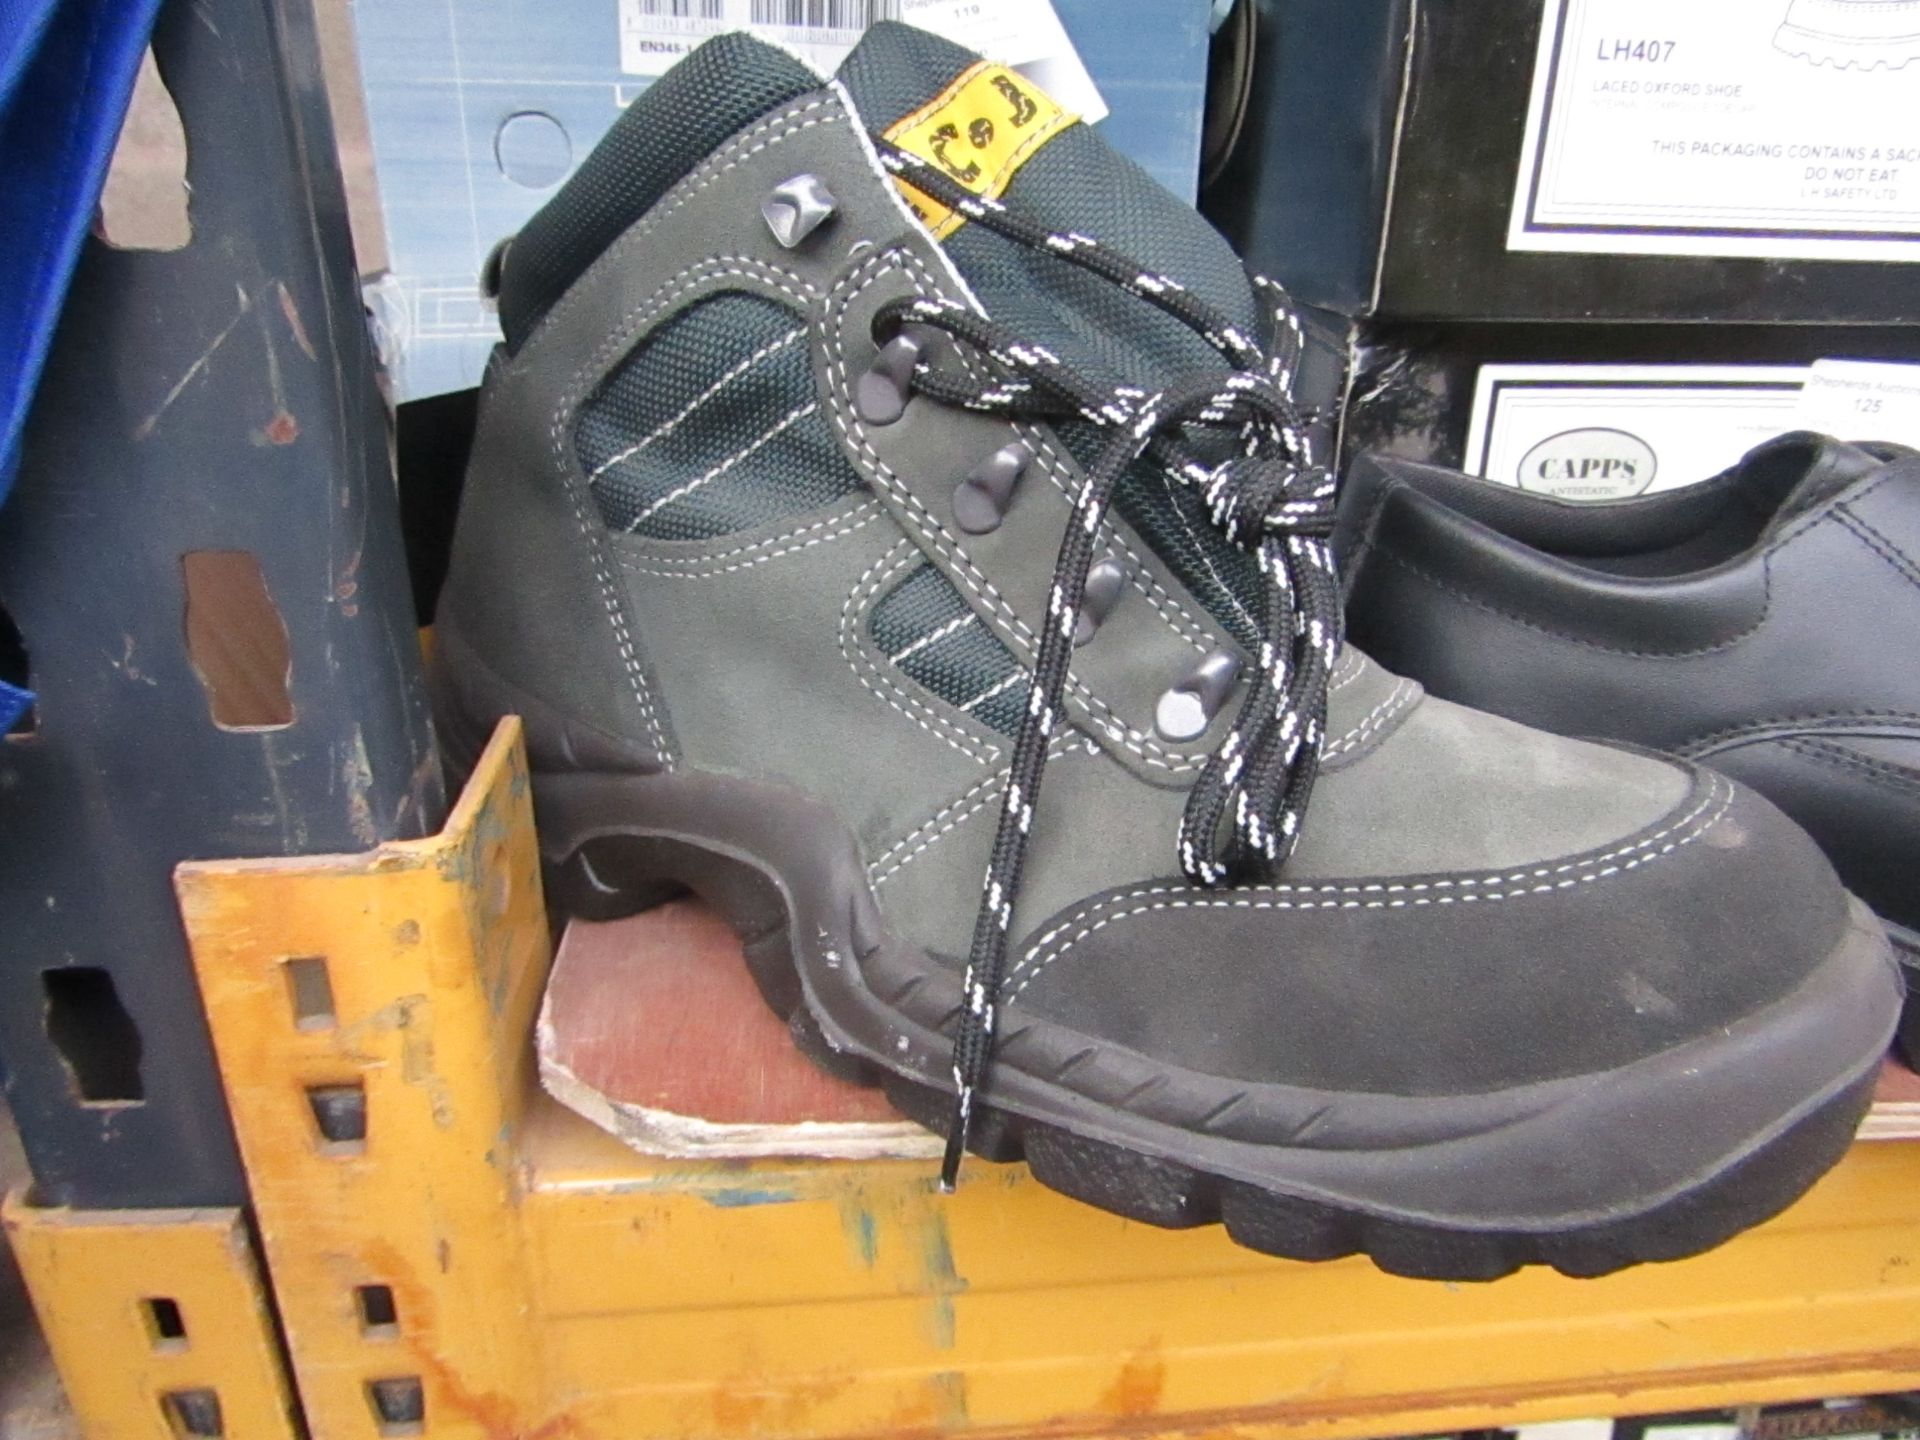 Aimont Safety Boot Size 13. New and boxed